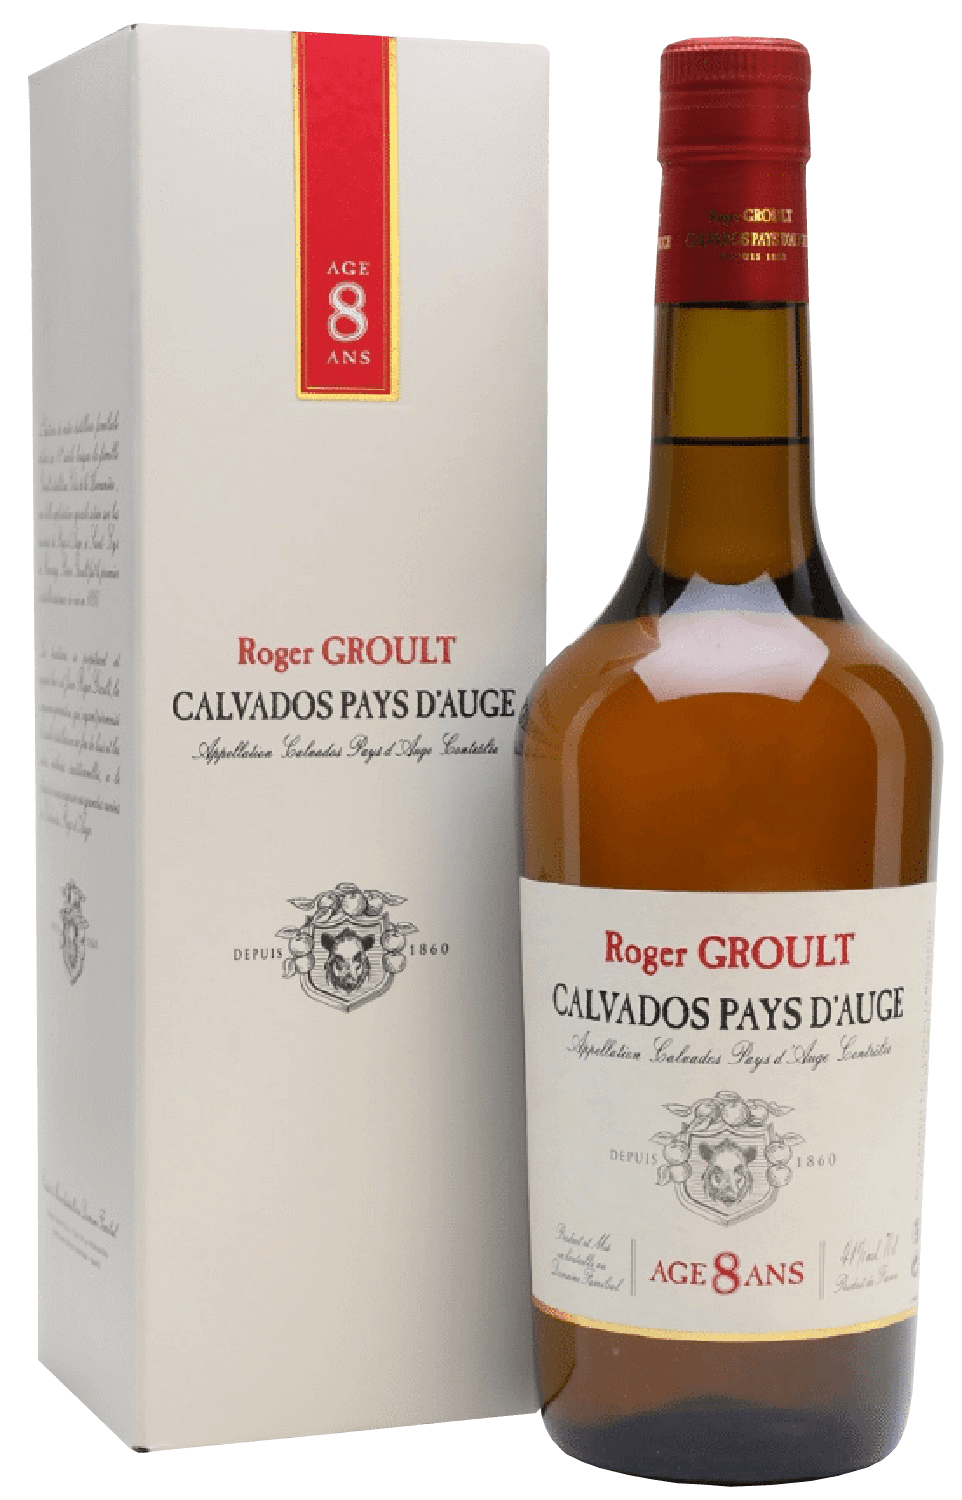 Calvados Pays D'Auge AOC 8 ans Roger Groult (gift box) doyen d or calvados pays d auge aoc roger groult gift box